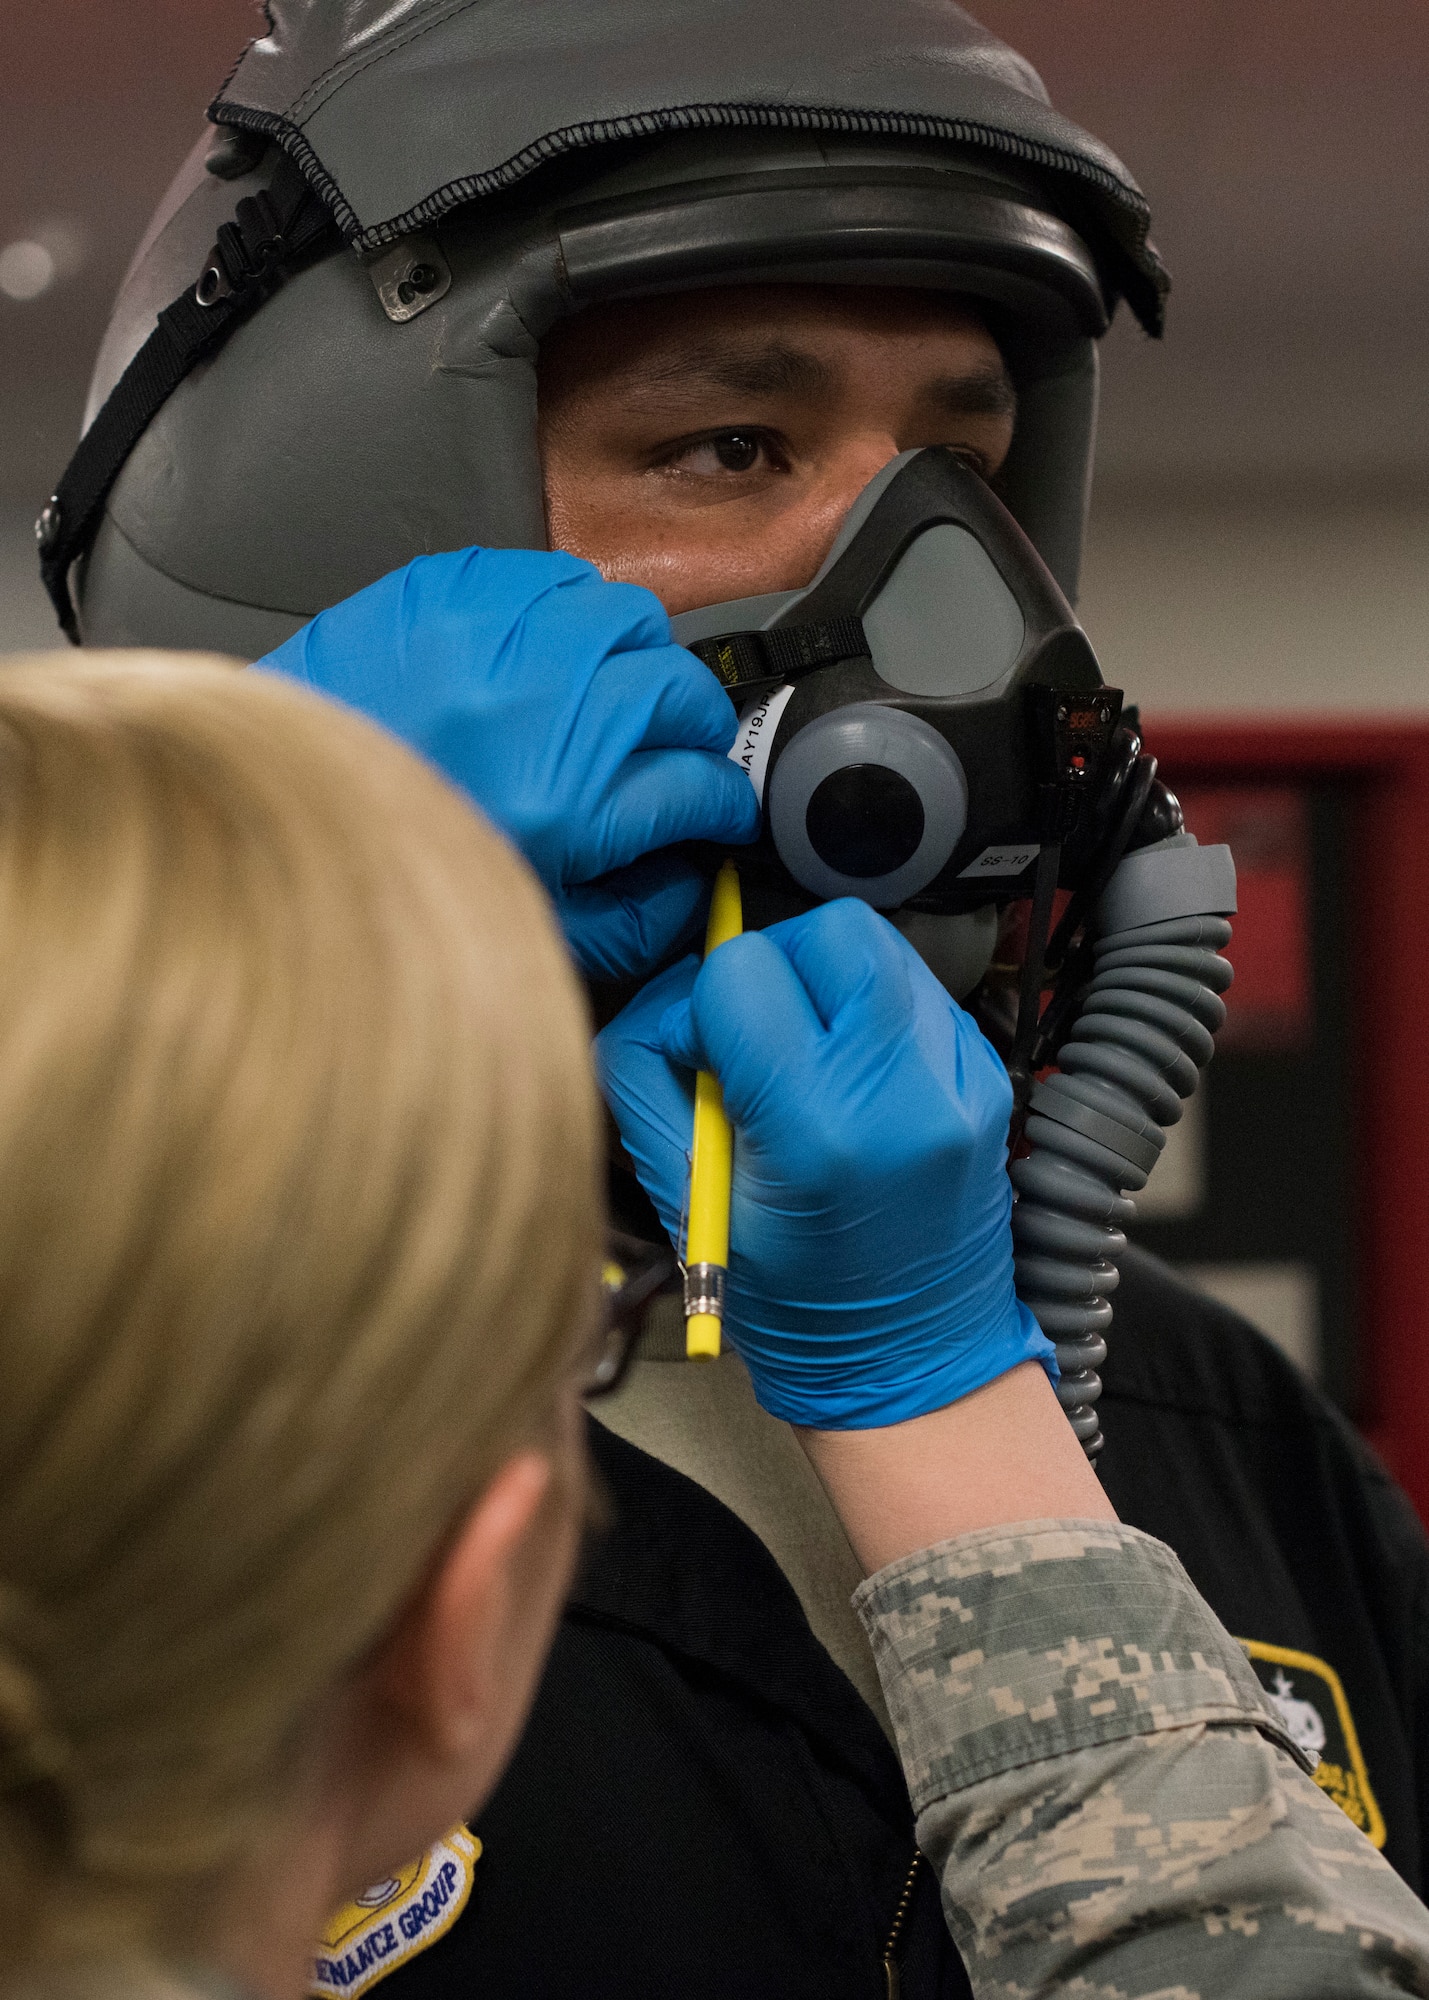 Airman 1st Class Kaci Ashby, 54th Operations Support Squadron Aircrew Flight Equipment technician, fits a flight mask for Staff Sgt. Alfredo Contreas, 311th Aircraft Maintenance Unit Dedicated Crew Chief, April 24, 2019, on Hill Air Force Base, Utah. Forty operations and maintenance personnel were given familiarization flights in F-16 Vipers during exercise Venom 19-01. (U.S. Air Force photo by Staff Sgt. BreeAnn Sachs)